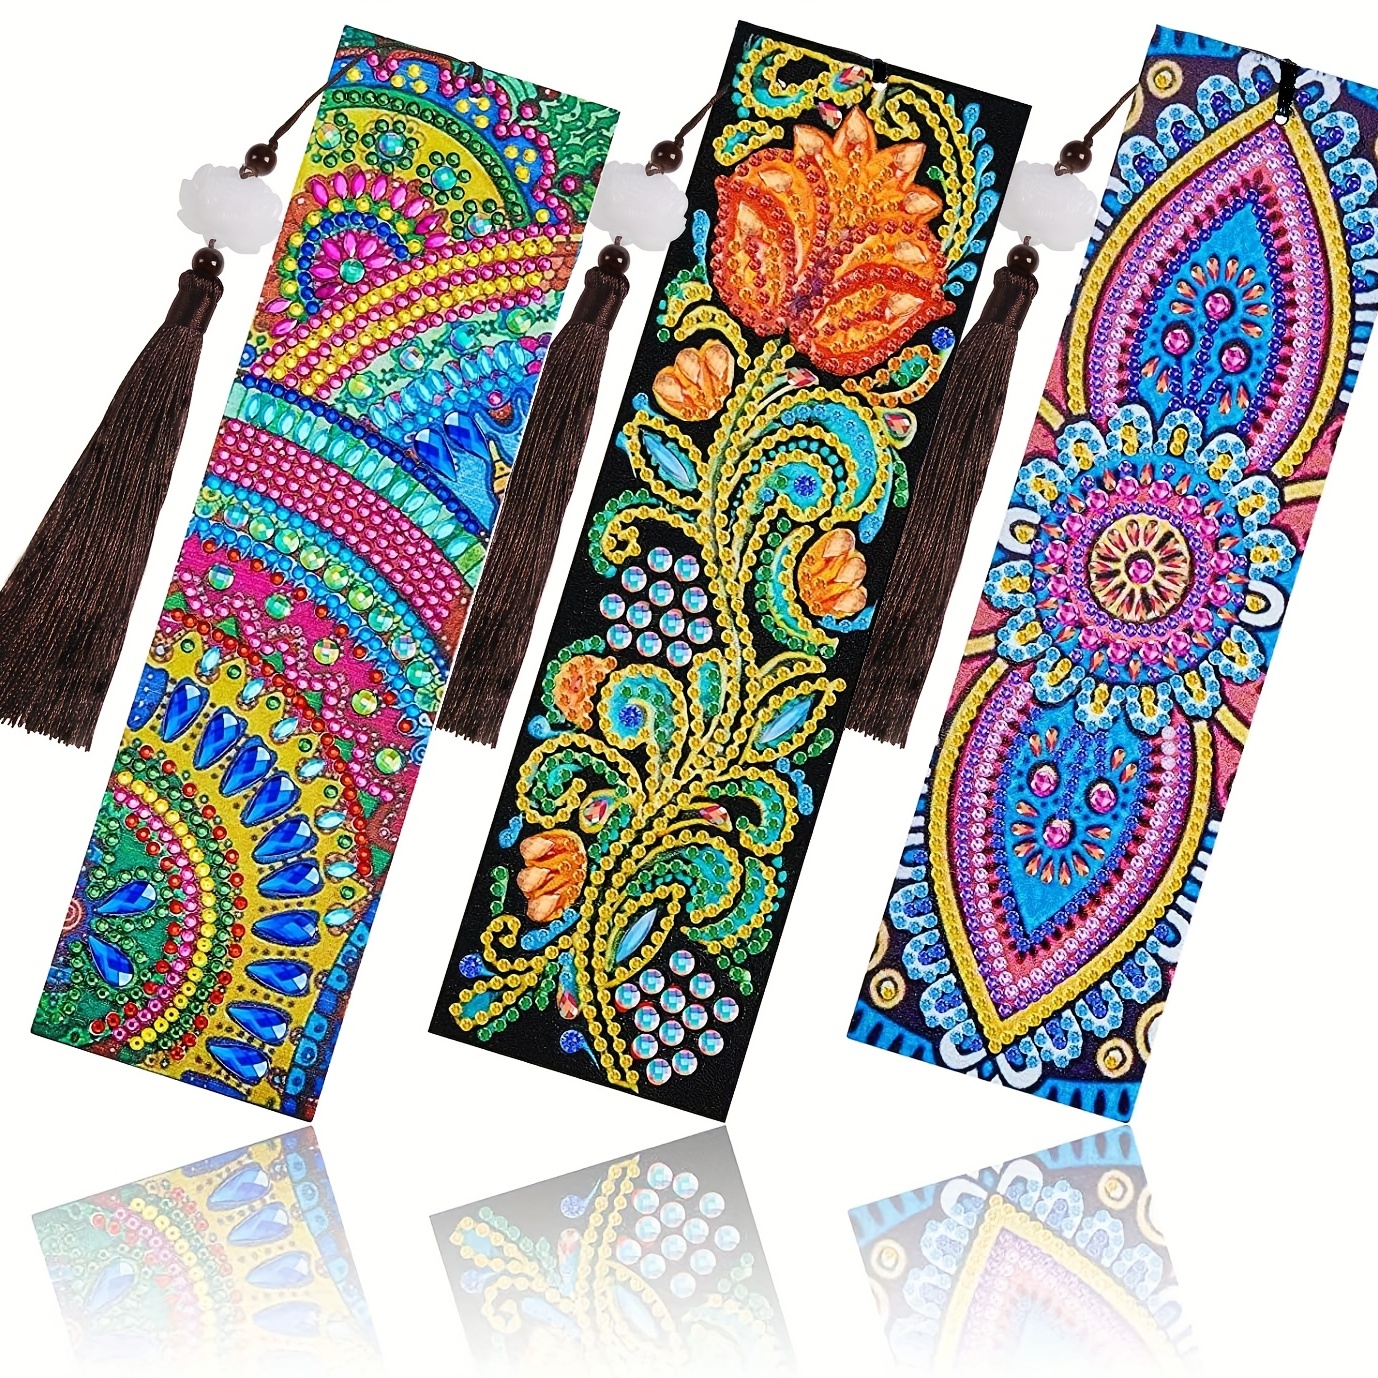  Diamond Art Bookmarks - Stunning DIY Diamond Painting Bookmark  Kits with Tassel for Students, Adults, and Beginners - Enhance Your Reading  Experience!(AA399-DIY Elephant)